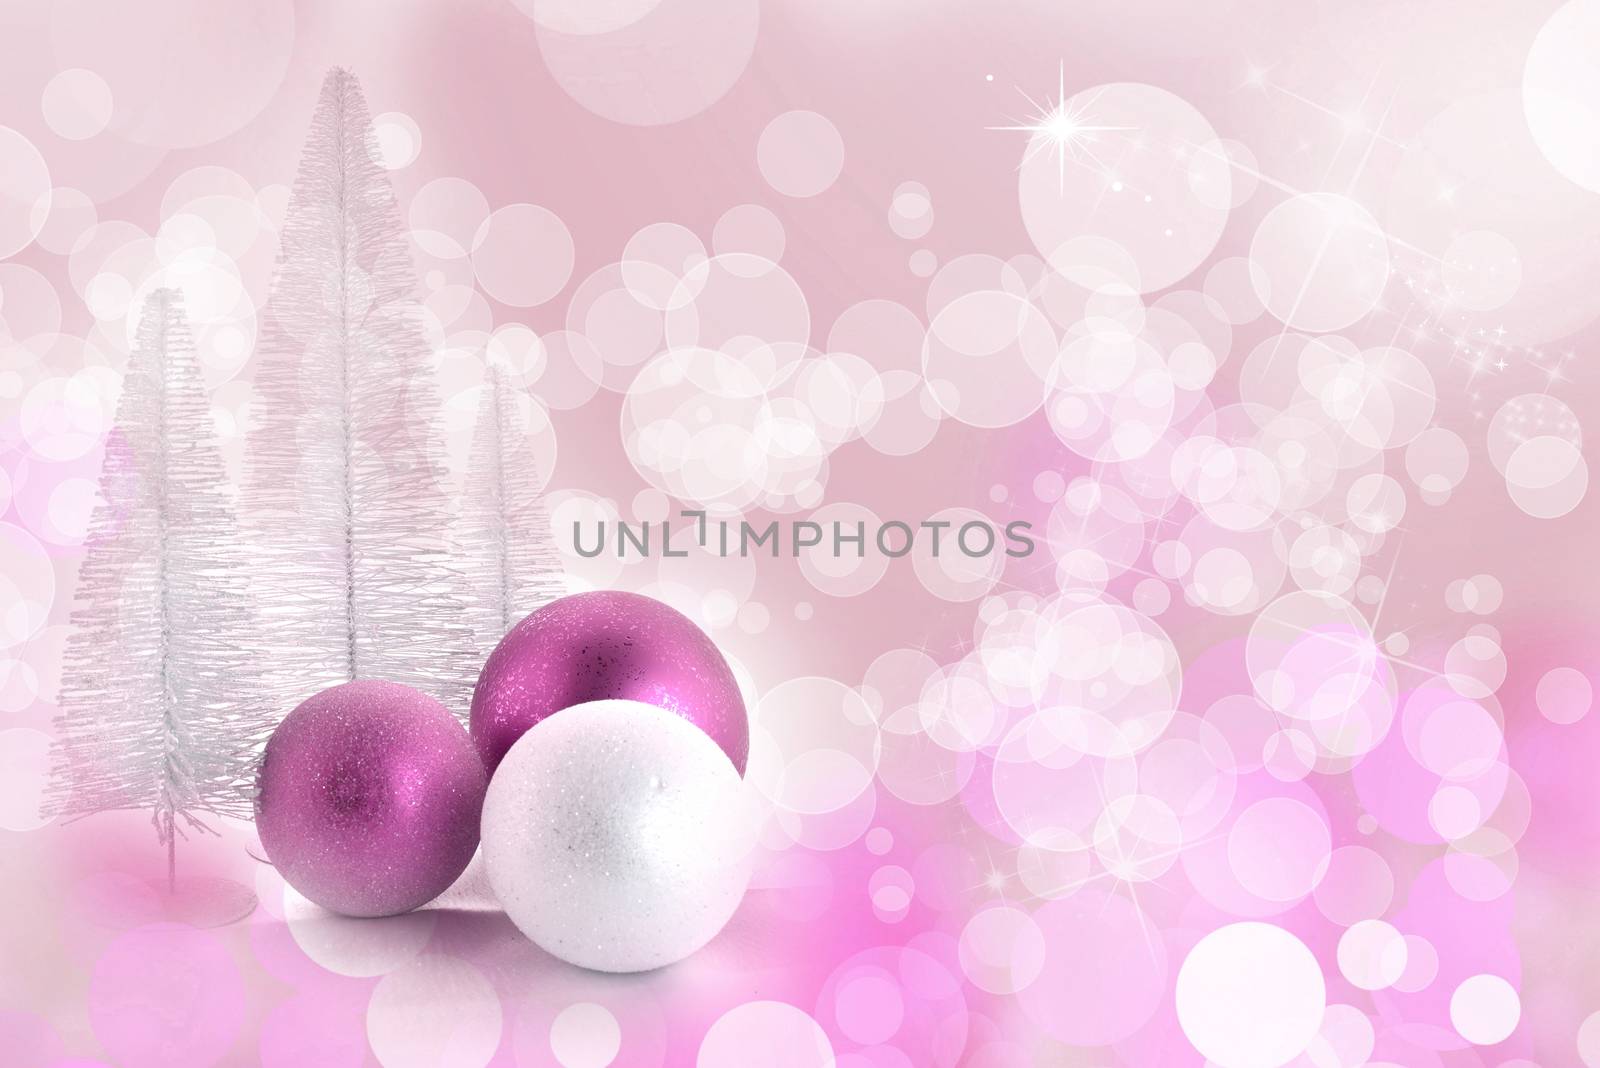 Chtistmas decor over pink bokeh background